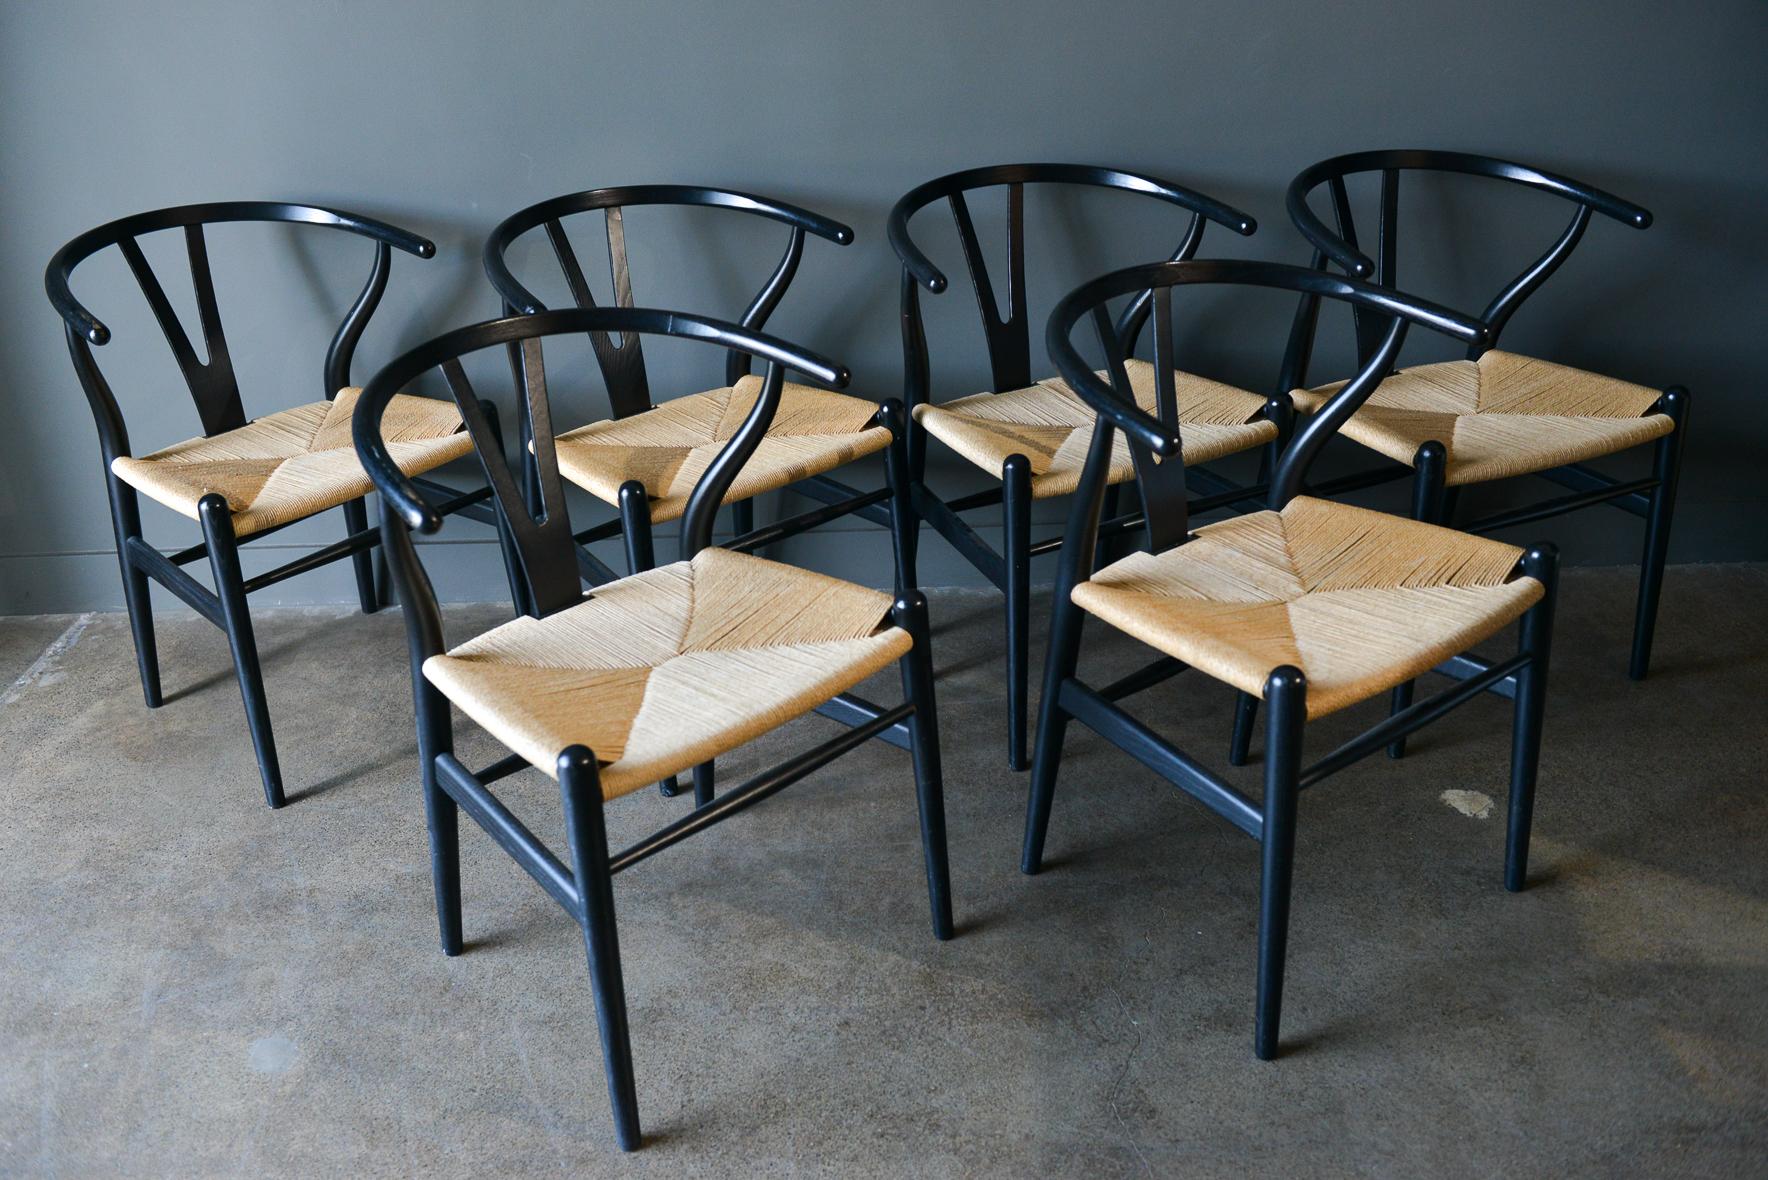 Set of 6 CH-24 Wishbone chairs by Hans Wegner in ebonized oak. Signed on underside, these are in very good original condition with only slight wear on some armrests as shown. Papercord seats are original and intact, see photos. Beautiful set of 6